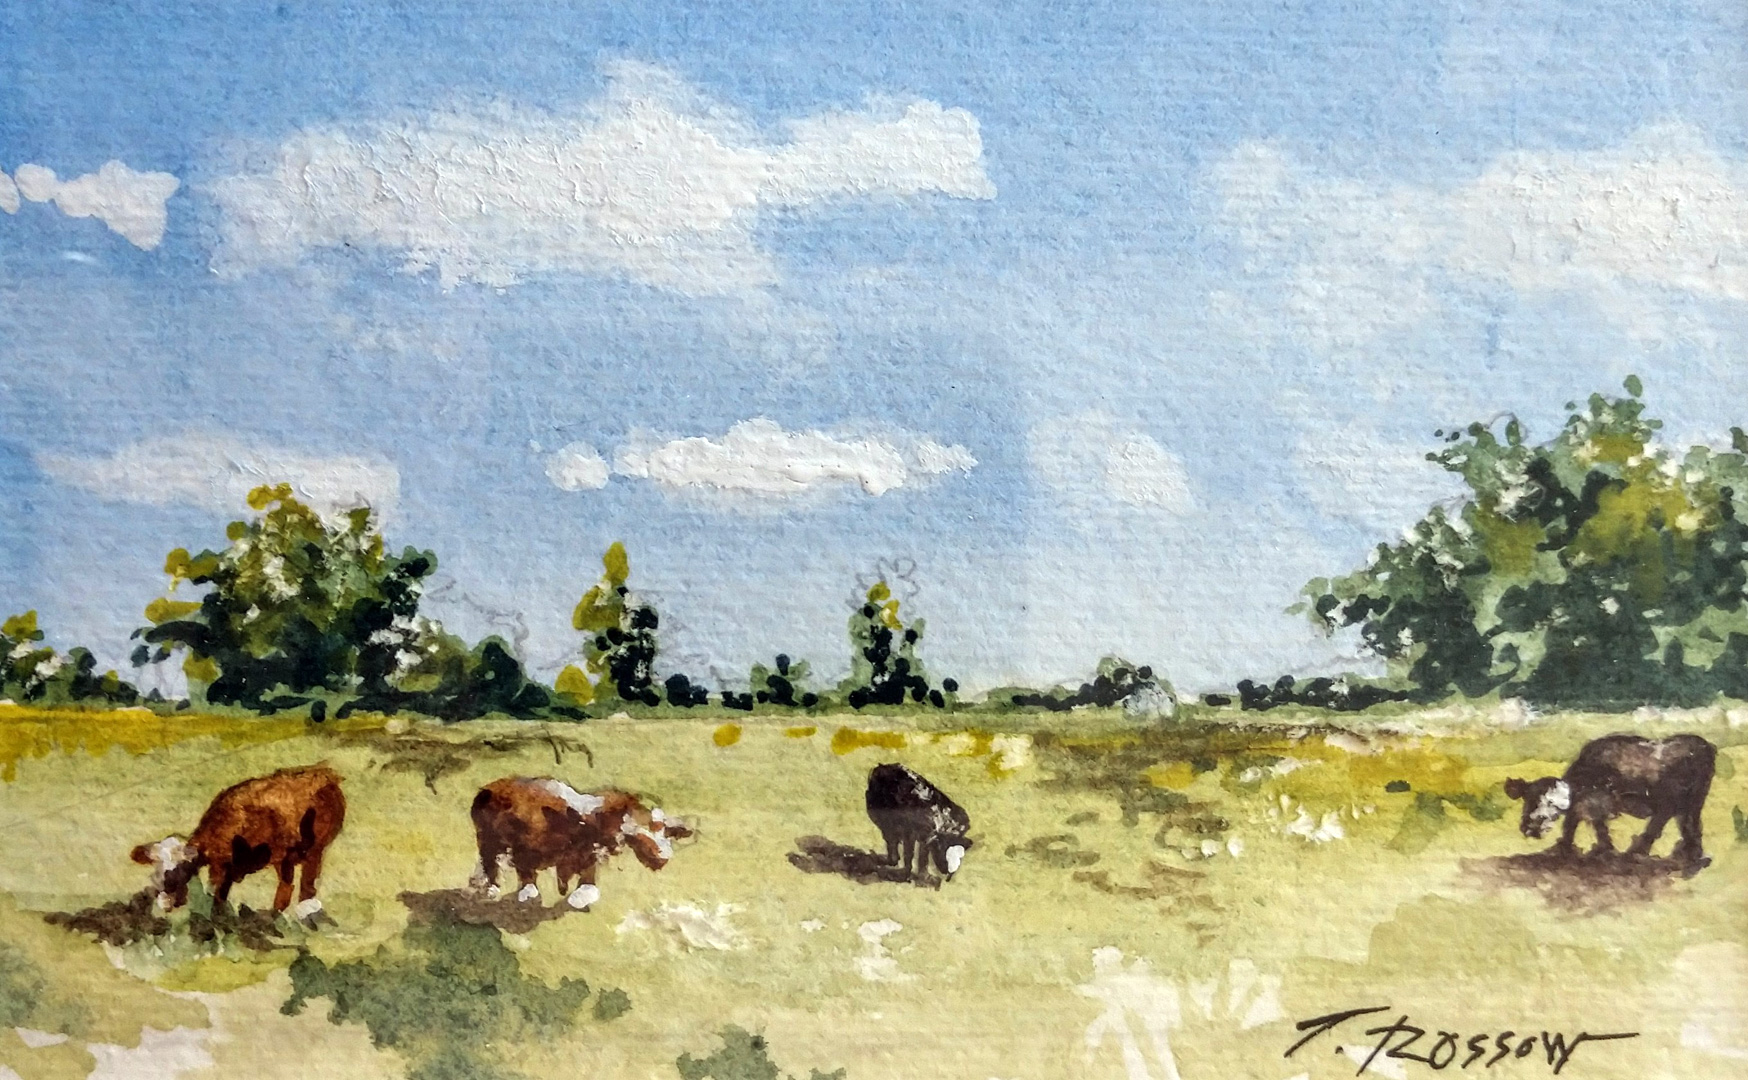 Cows in Field, Watercolor on paper, 5.5 x 4